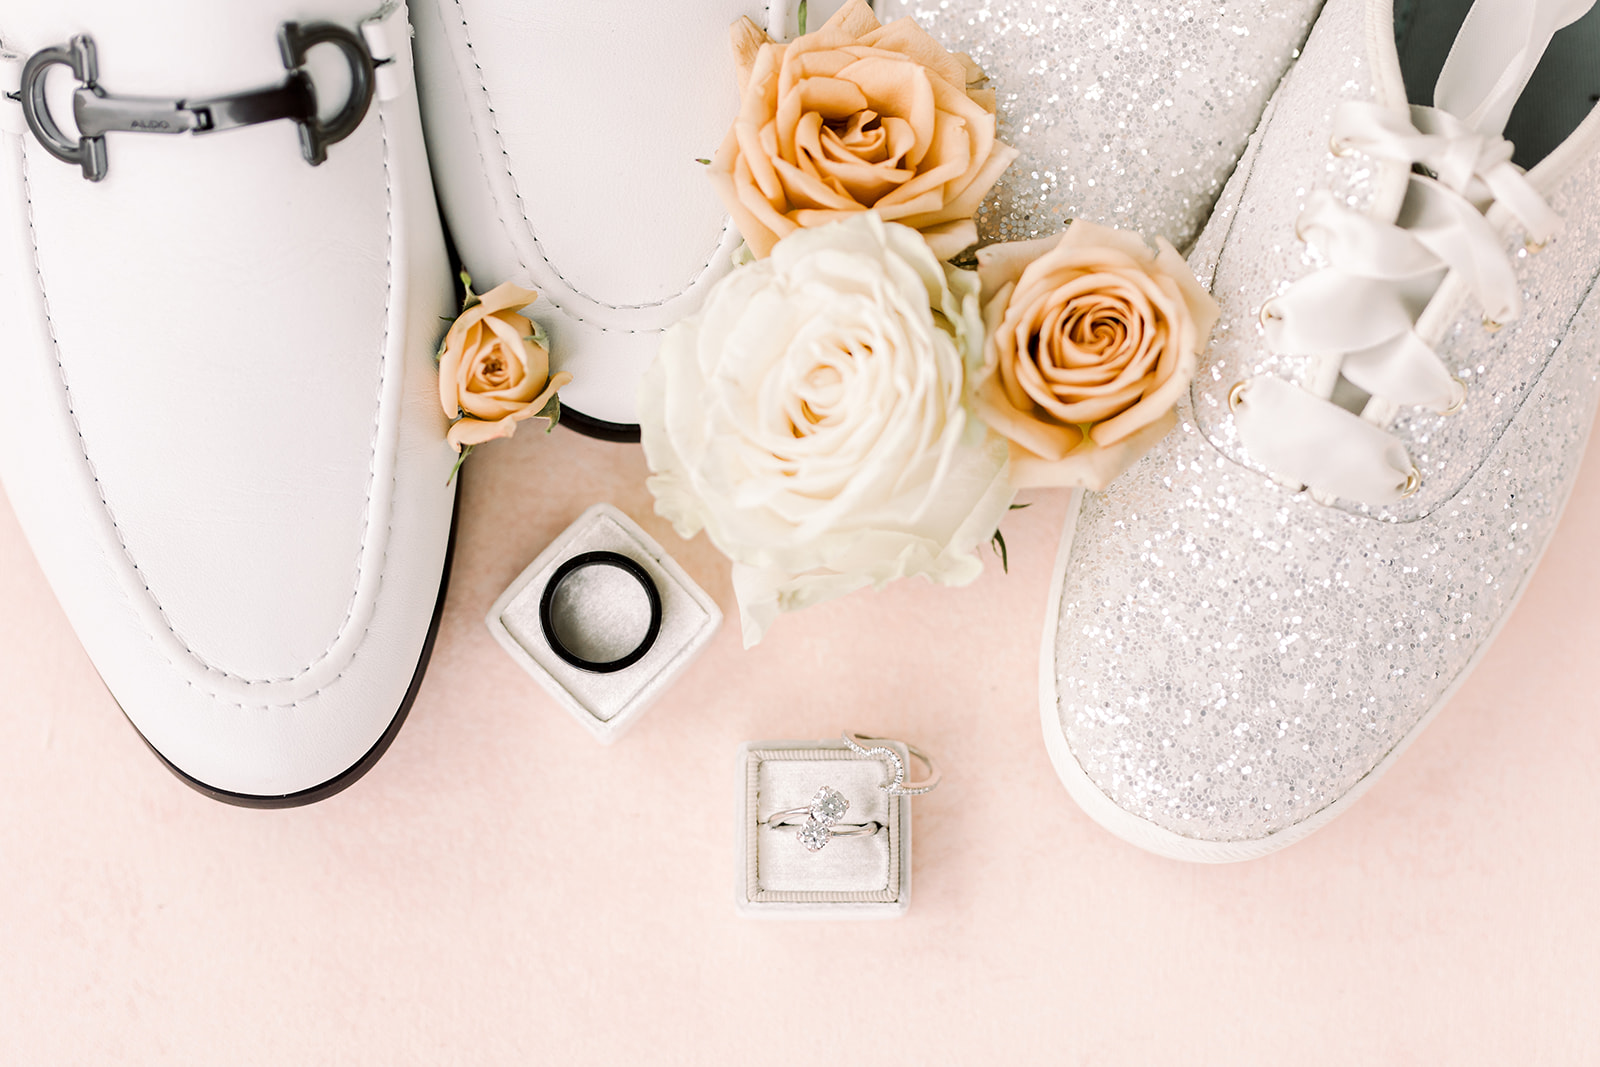 Bride and groom wedding shoes details flatlay